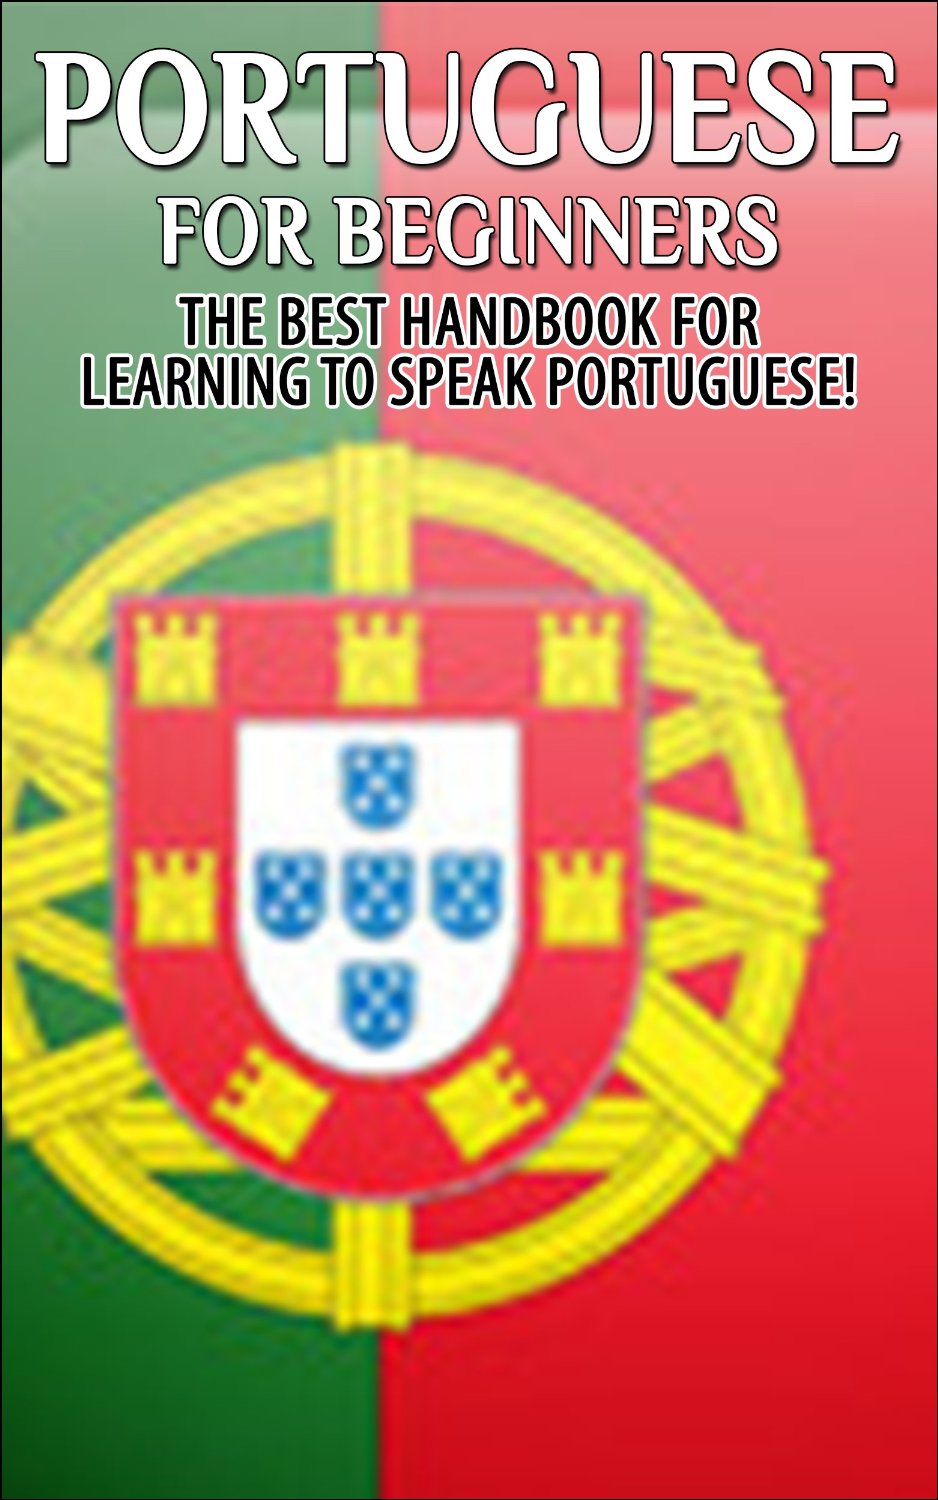 Portuguese for Beginners: The Best Handbook for Learning to Speak Portuguese (Portugal, Portuguese, Learn to speak Portuguese, Portuguese Language, Speak Portuguese, Learn Portuguese) by Getaway Guides